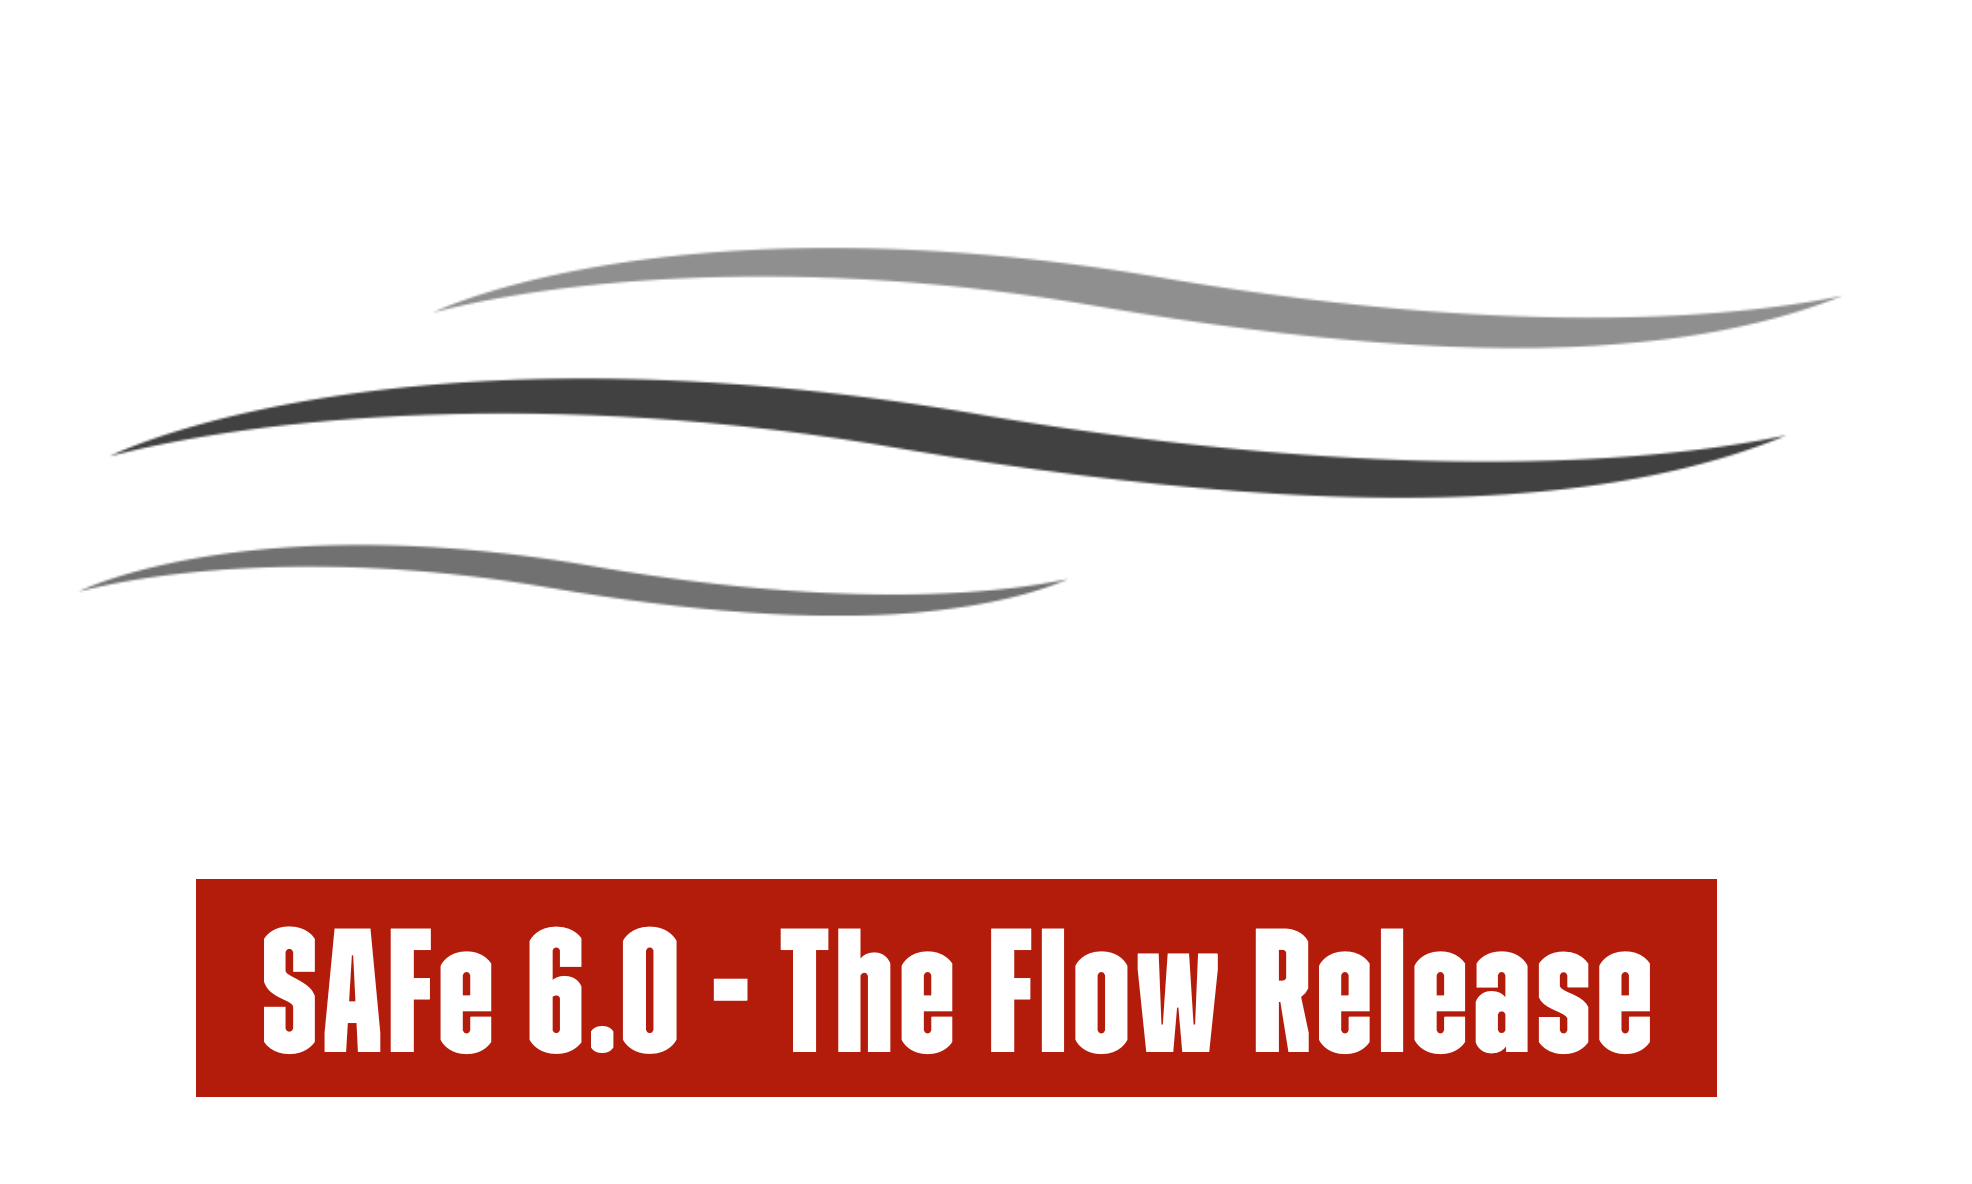 SAFe 6.0 is the “Flow Release”